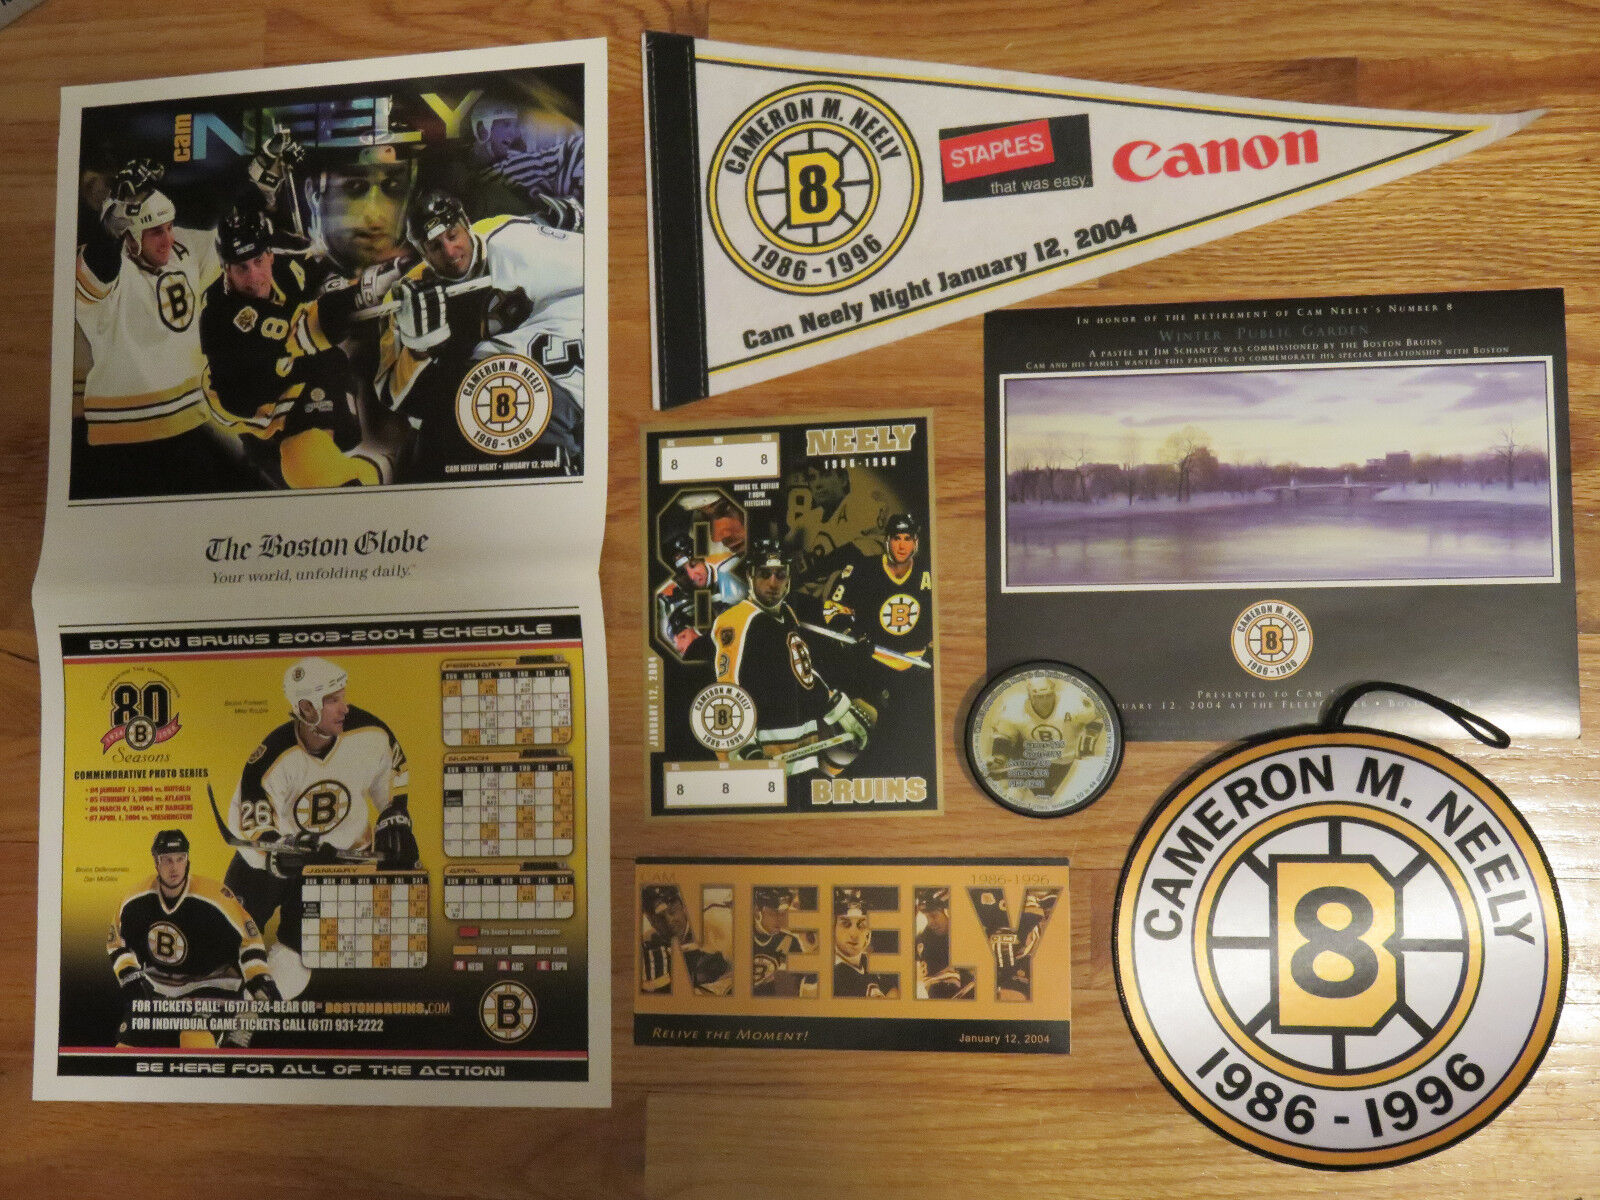 CAM NEELY No. 8 Retirement Quality inspection BANNER TICKET Max 43% OFF Package PENNANT POSTER